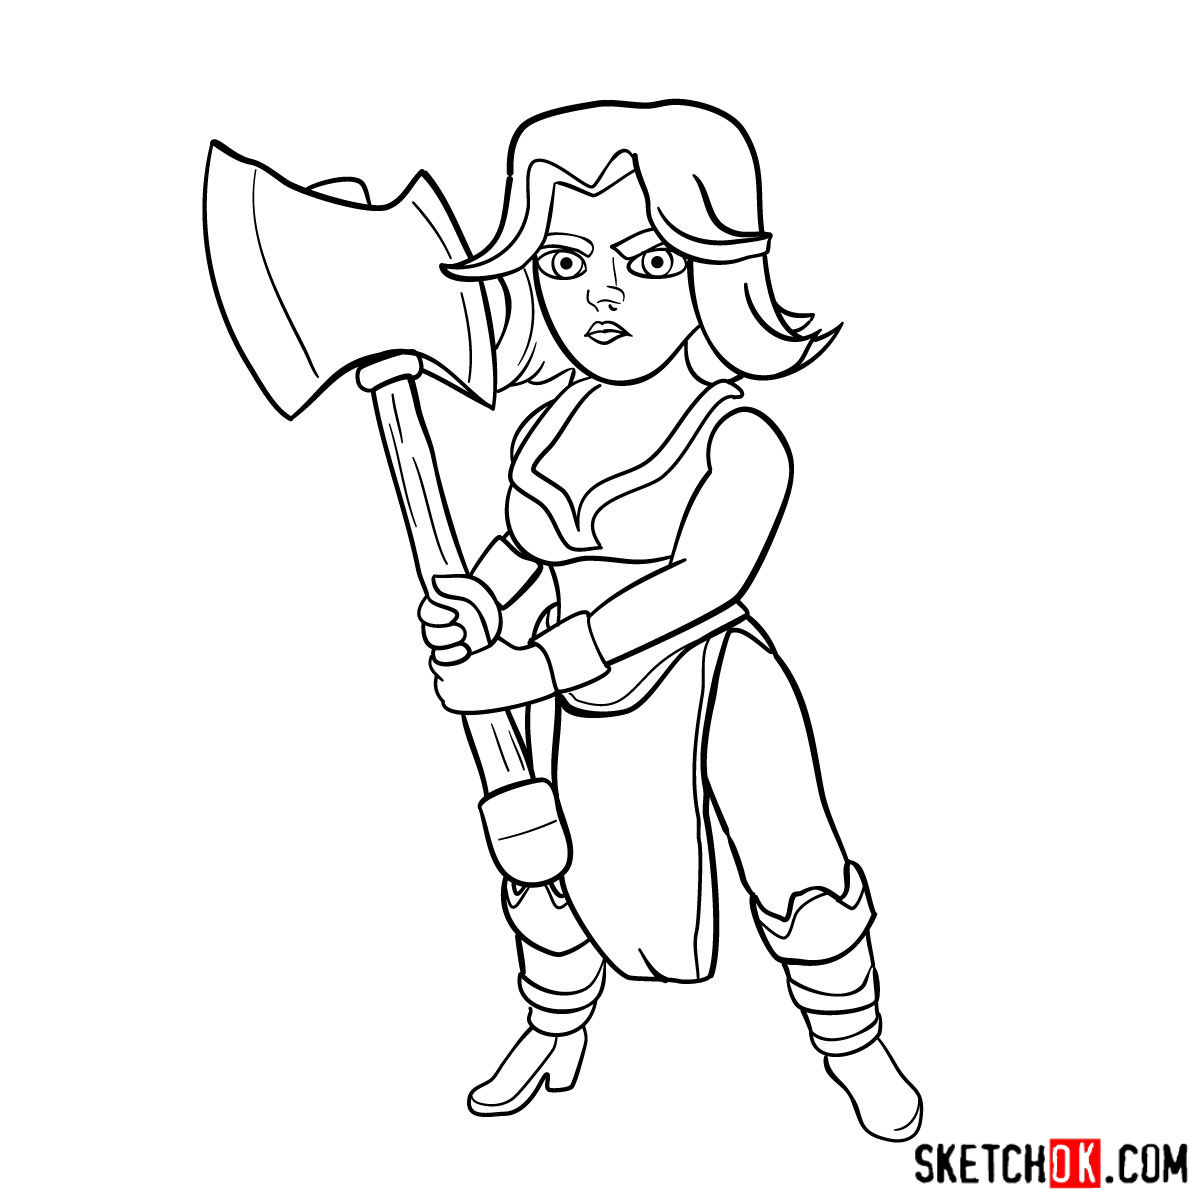 How to draw Valkyrie from Clash of Clans - step 13